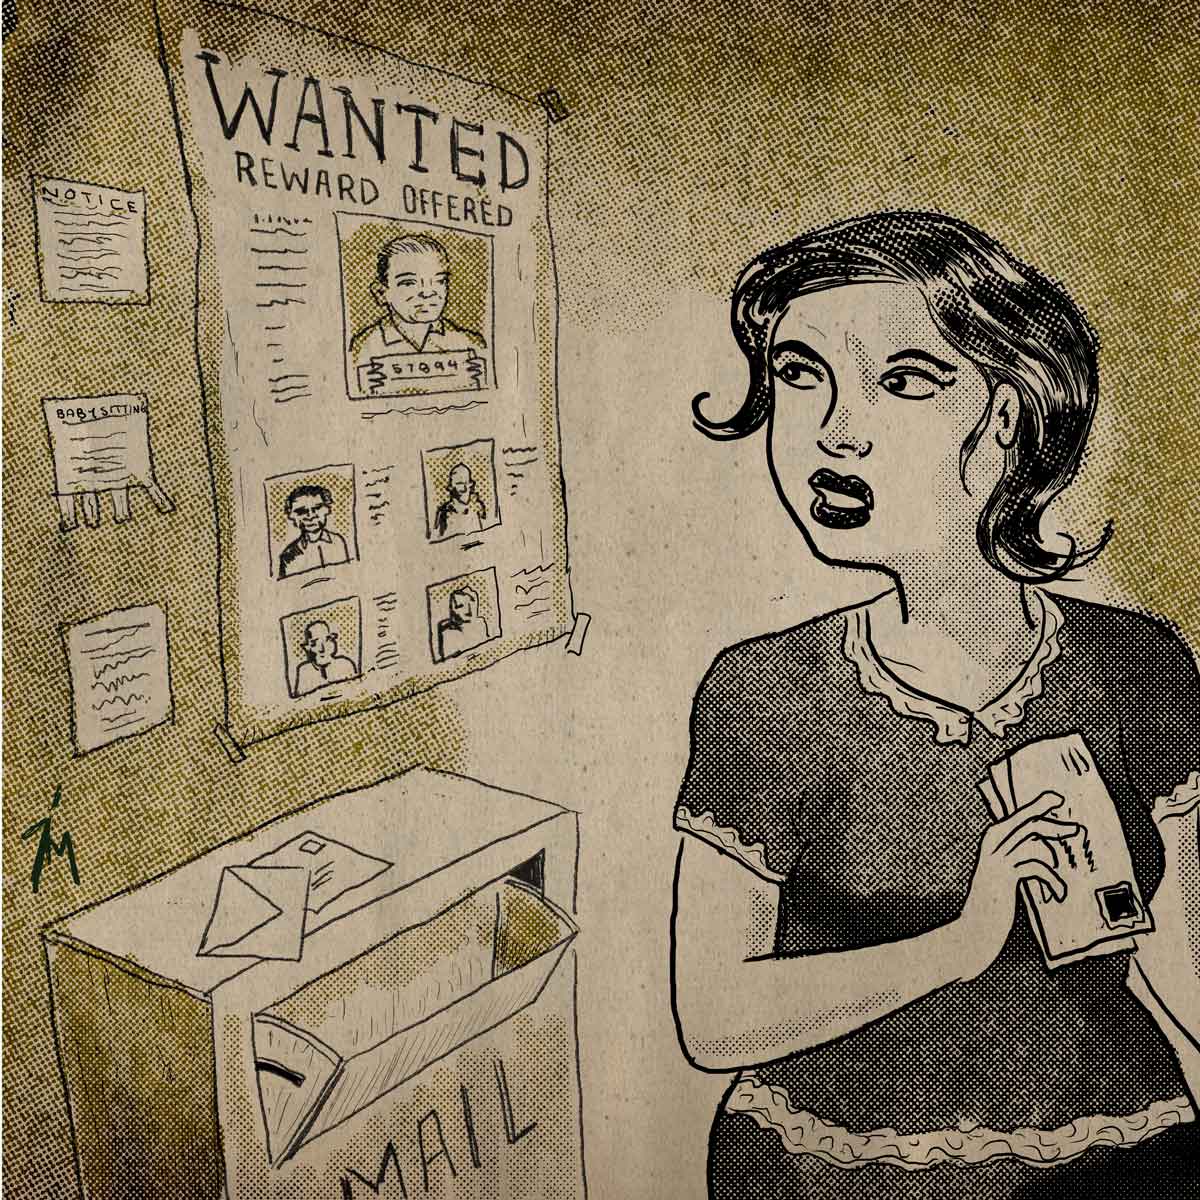 Illustration of woman recognizing man on Wanted poster.